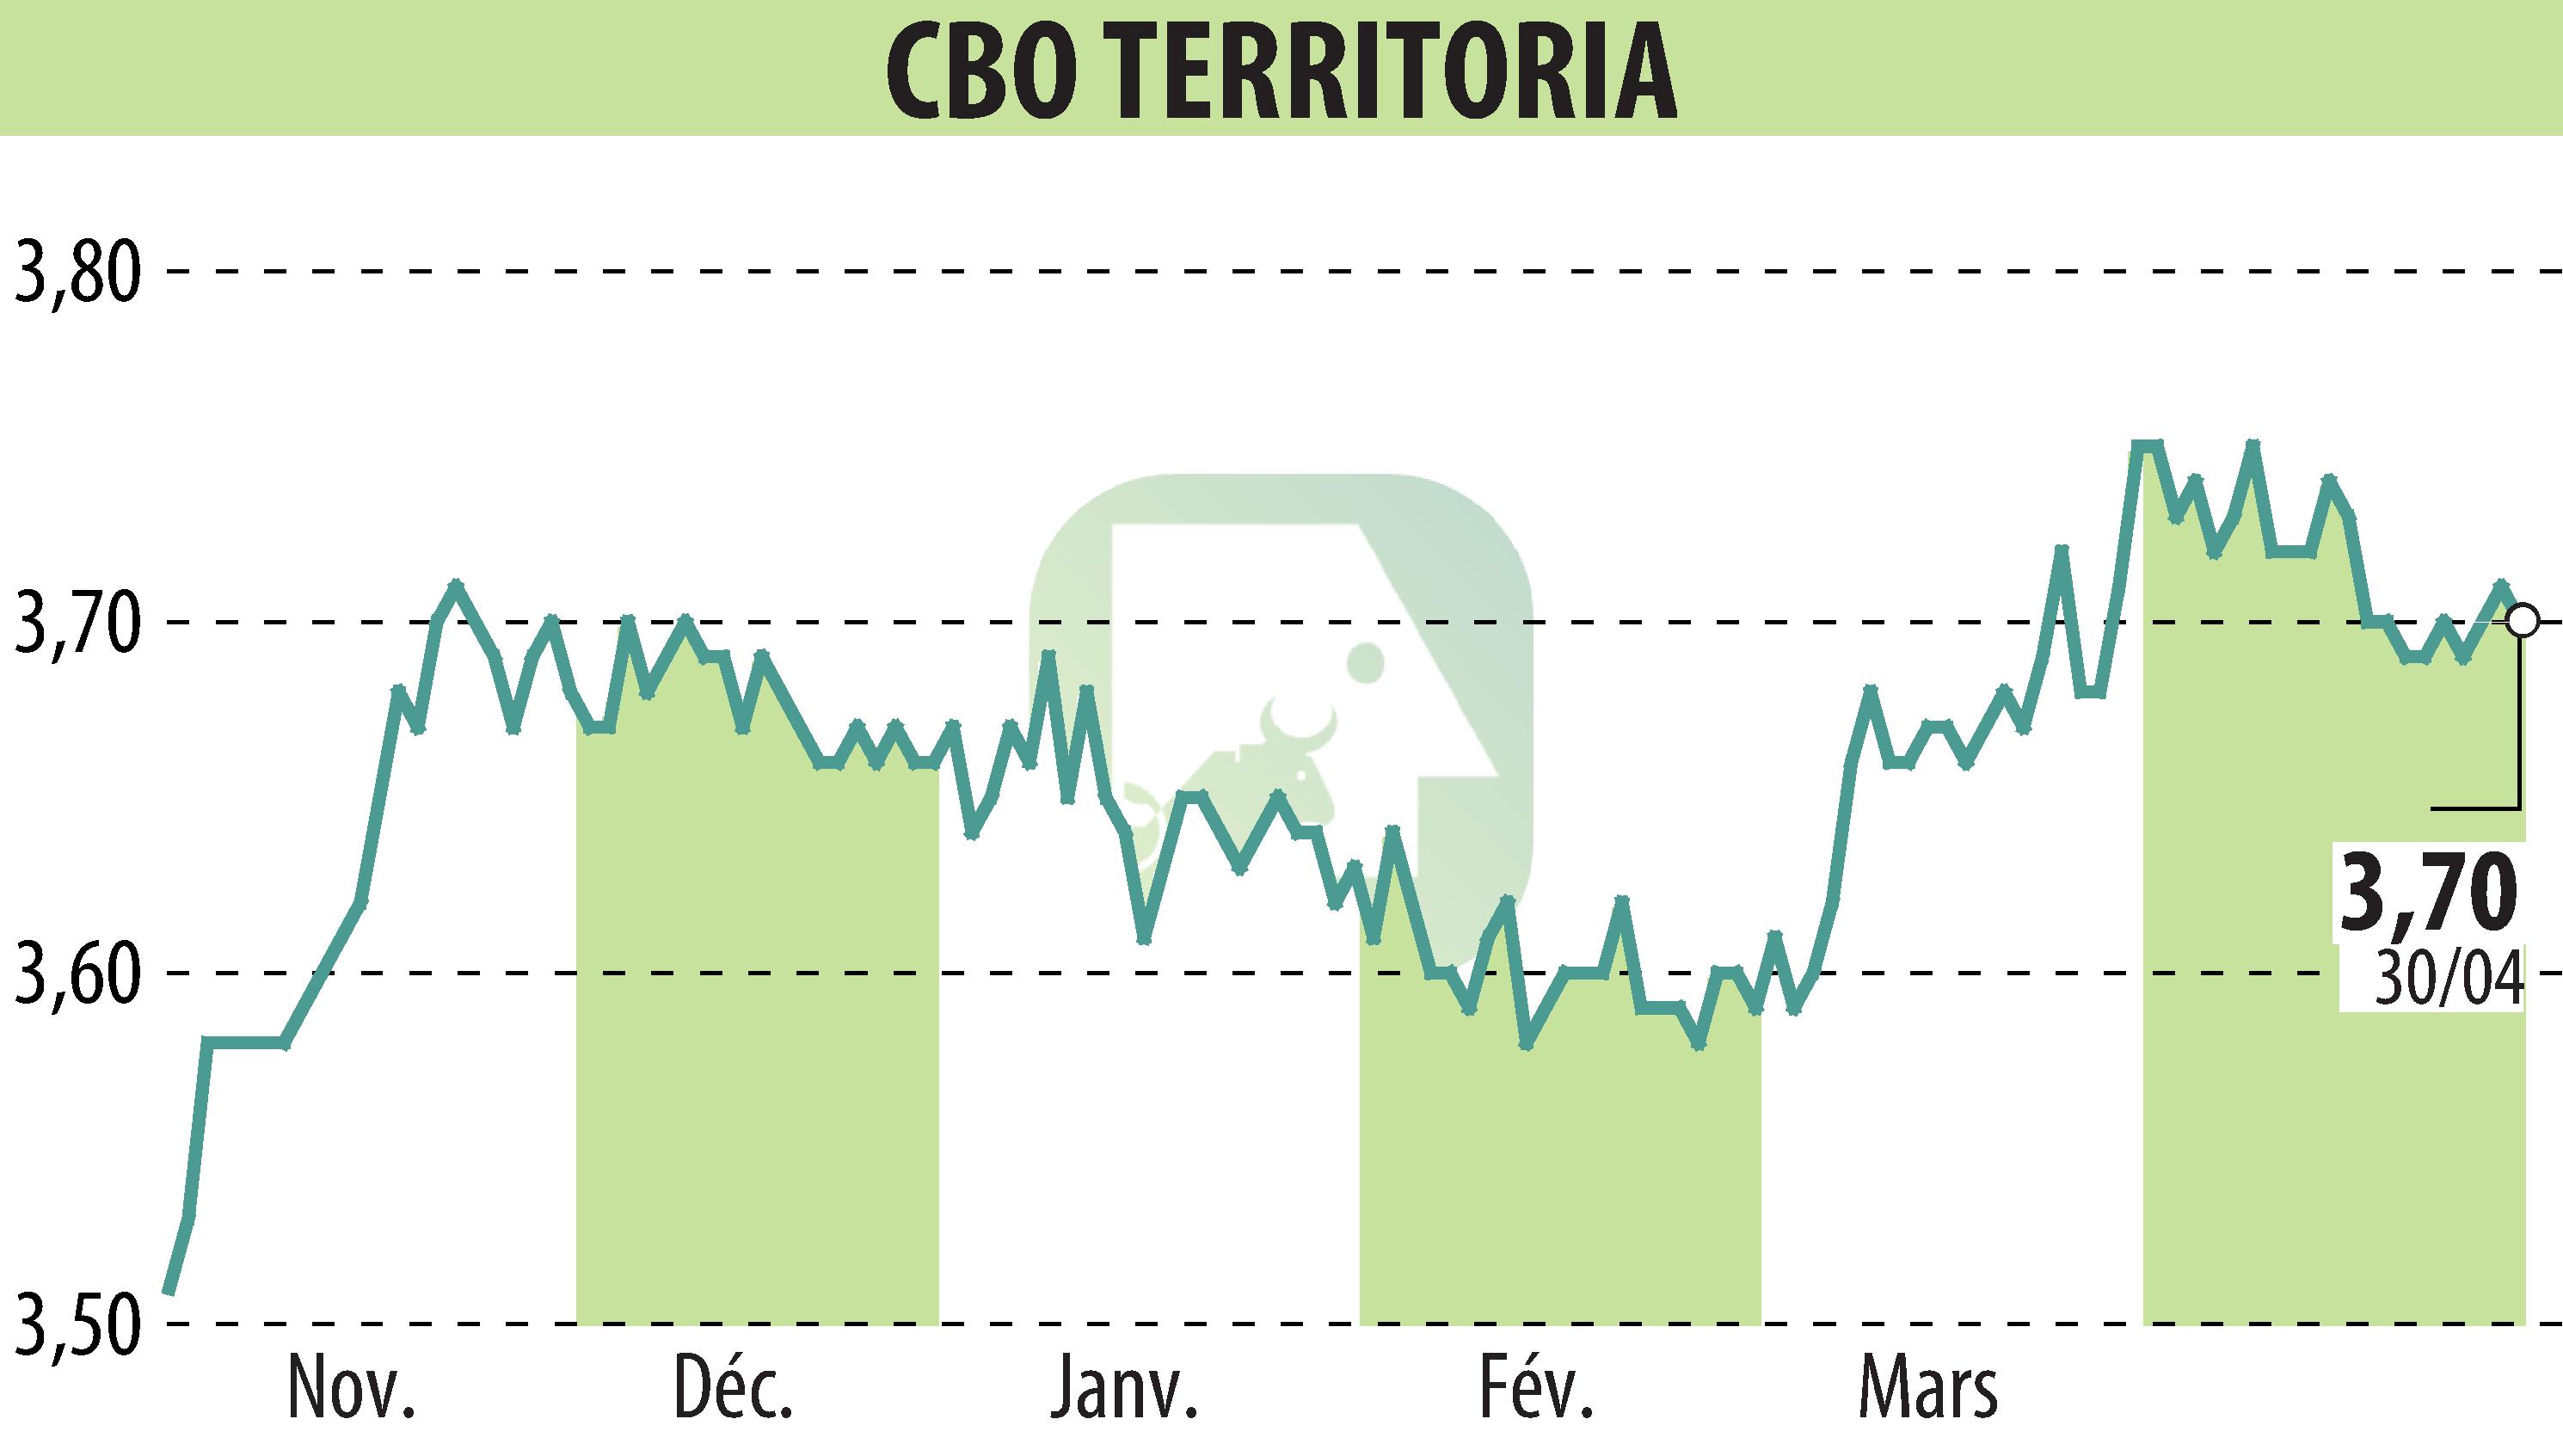 Stock price chart of CBO TERRITORIA  (EPA:CBOT) showing fluctuations.